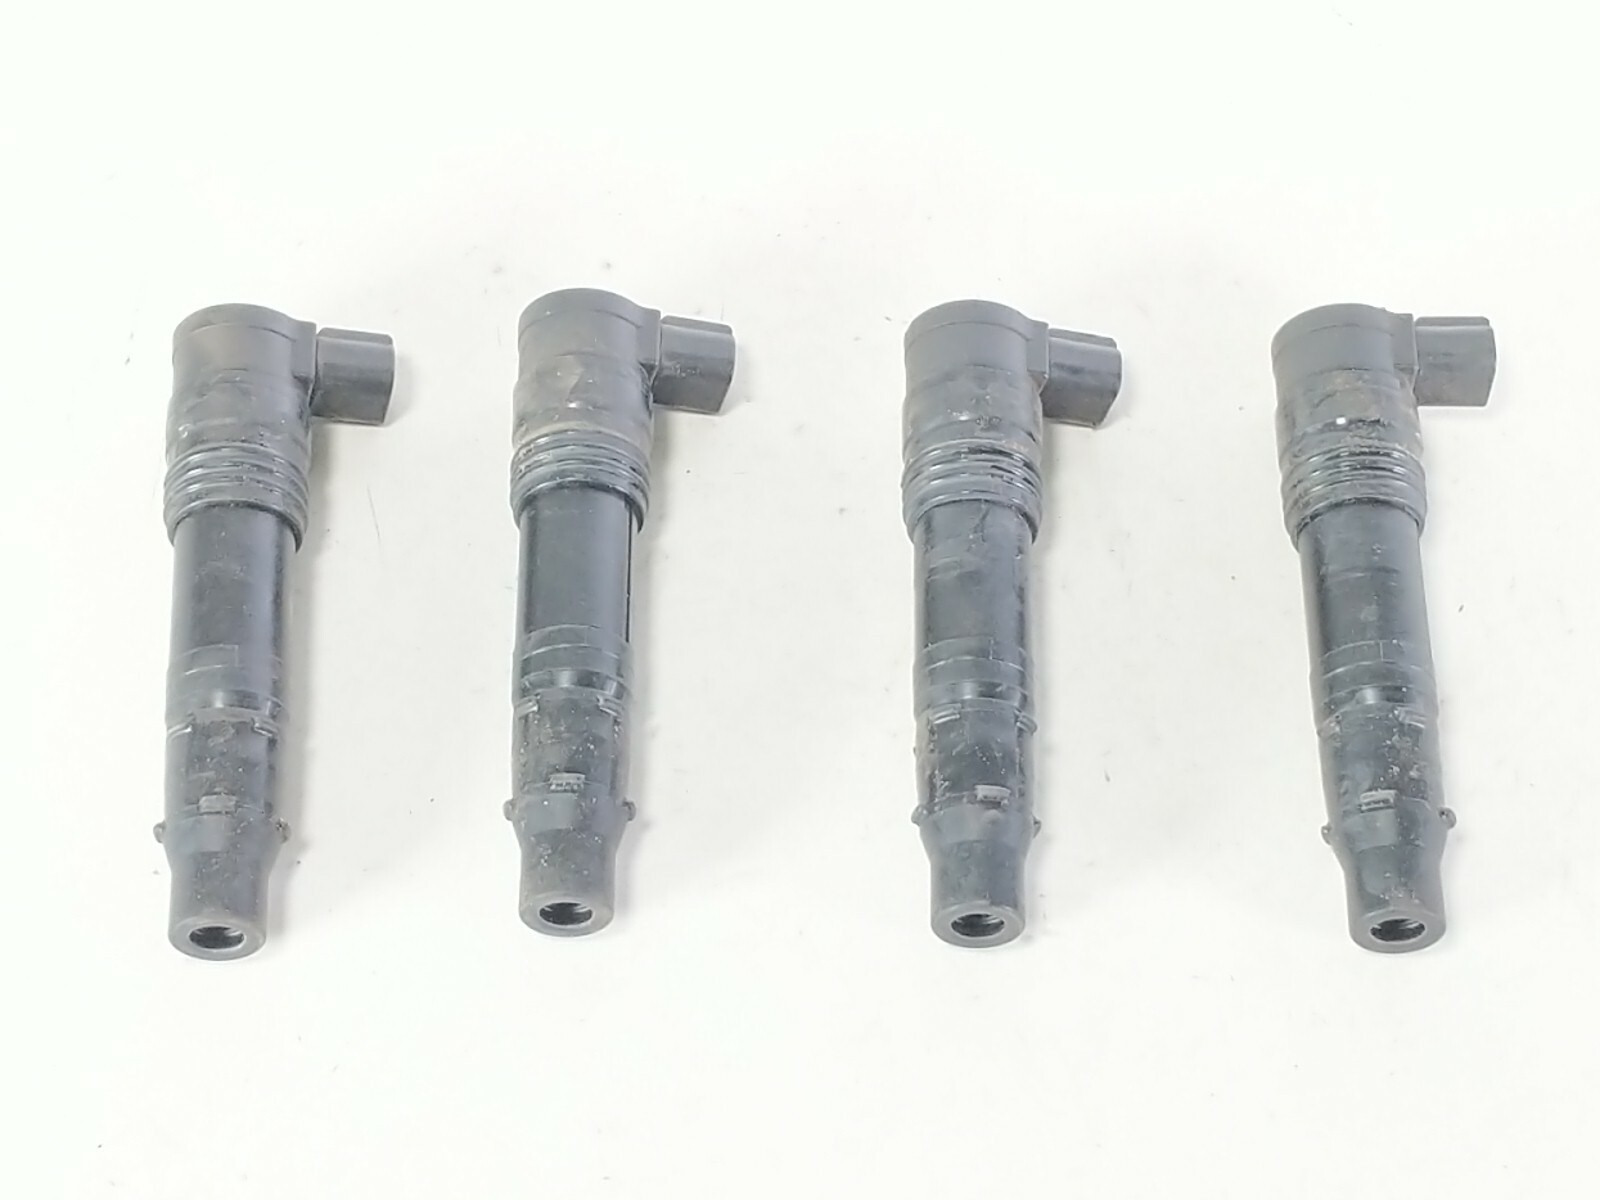 08 09 Kawasaki Concours ZG1400 Ignition Coil Plugs Packs 7921